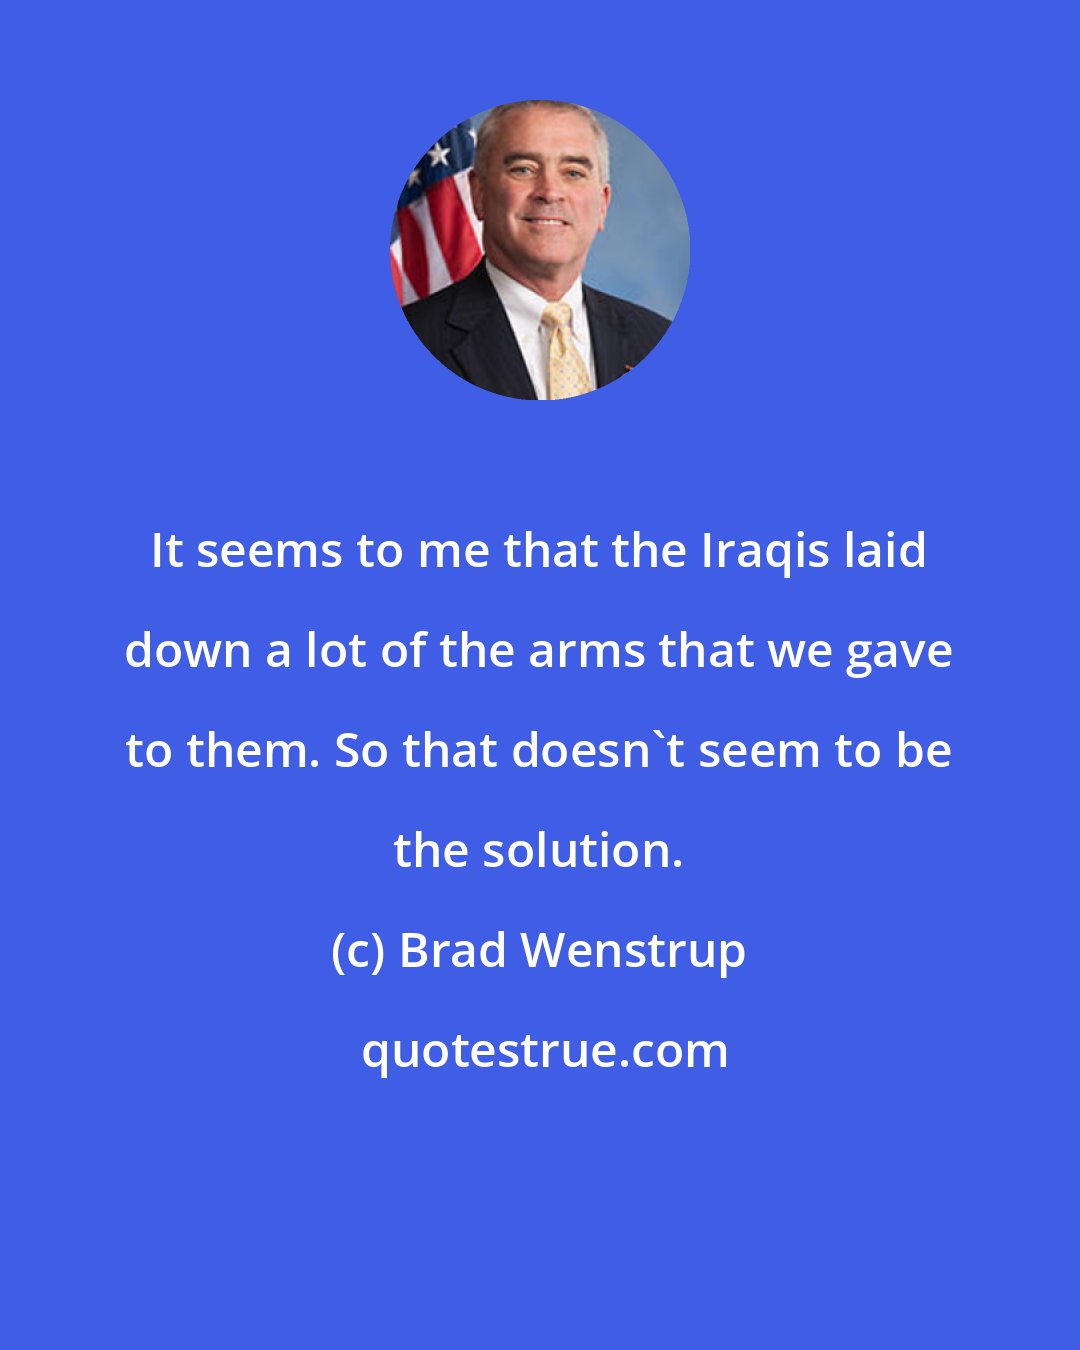 Brad Wenstrup: It seems to me that the Iraqis laid down a lot of the arms that we gave to them. So that doesn't seem to be the solution.